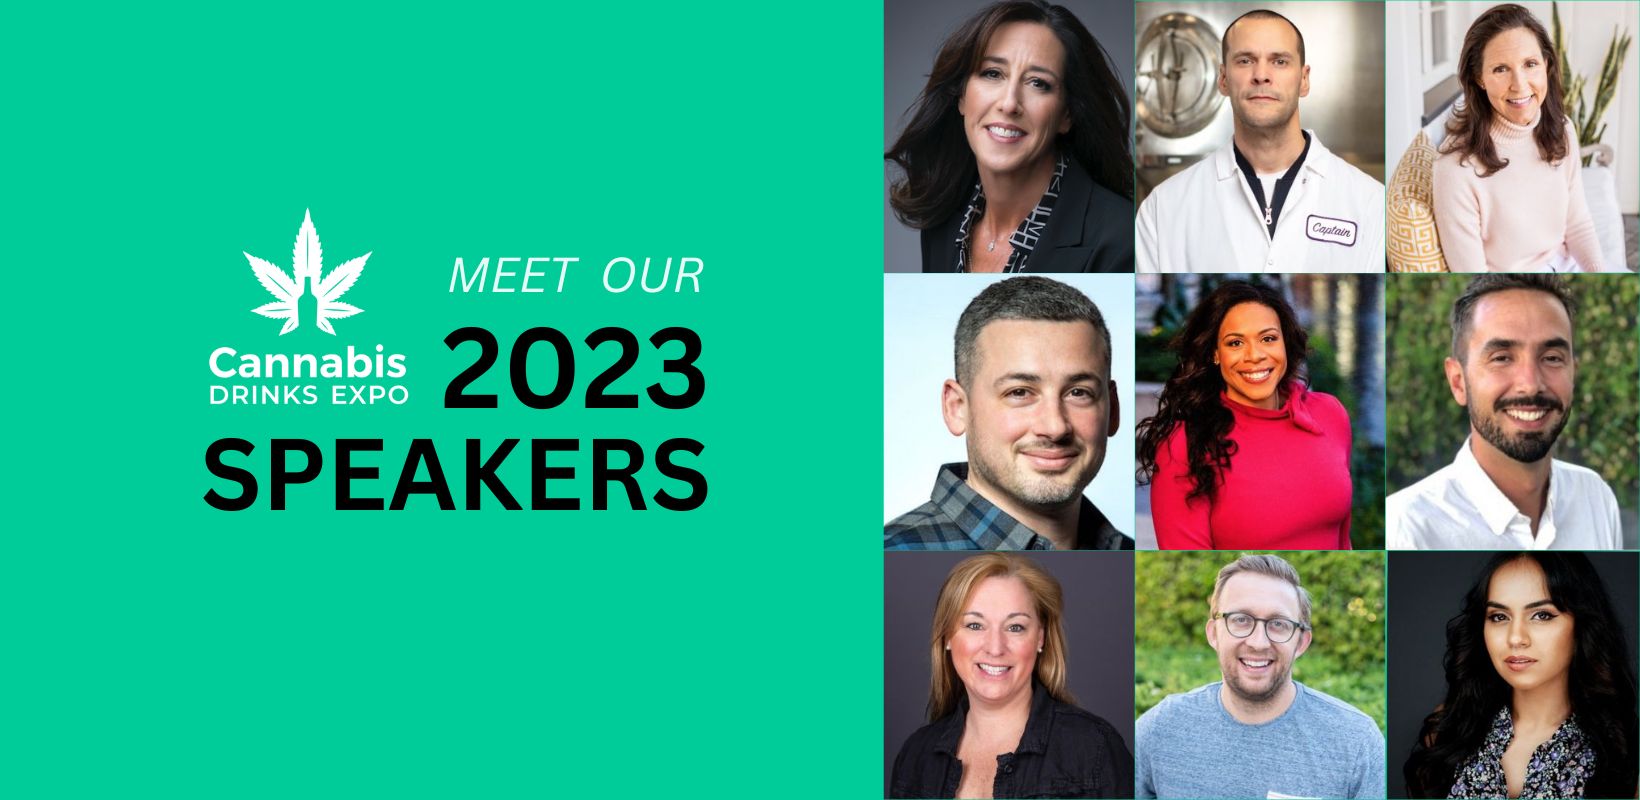 Photo for: Who is speaking at 2023 Cannabis Drinks Expo?